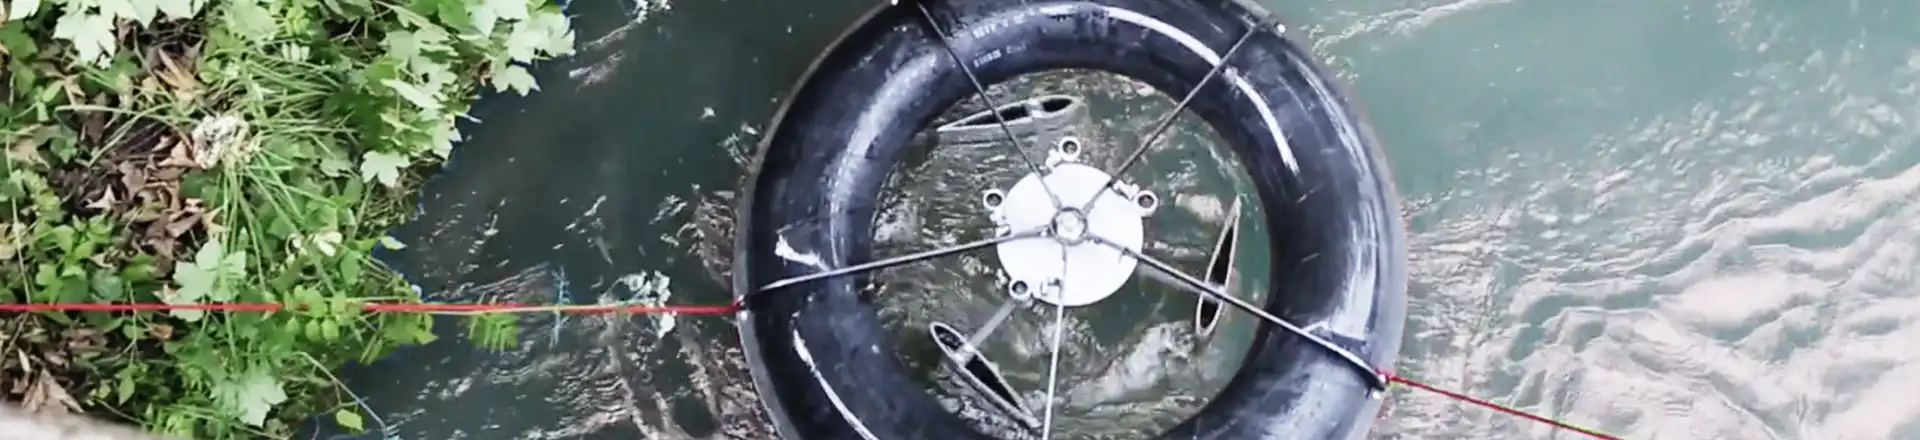 rubber ring in flowing river water